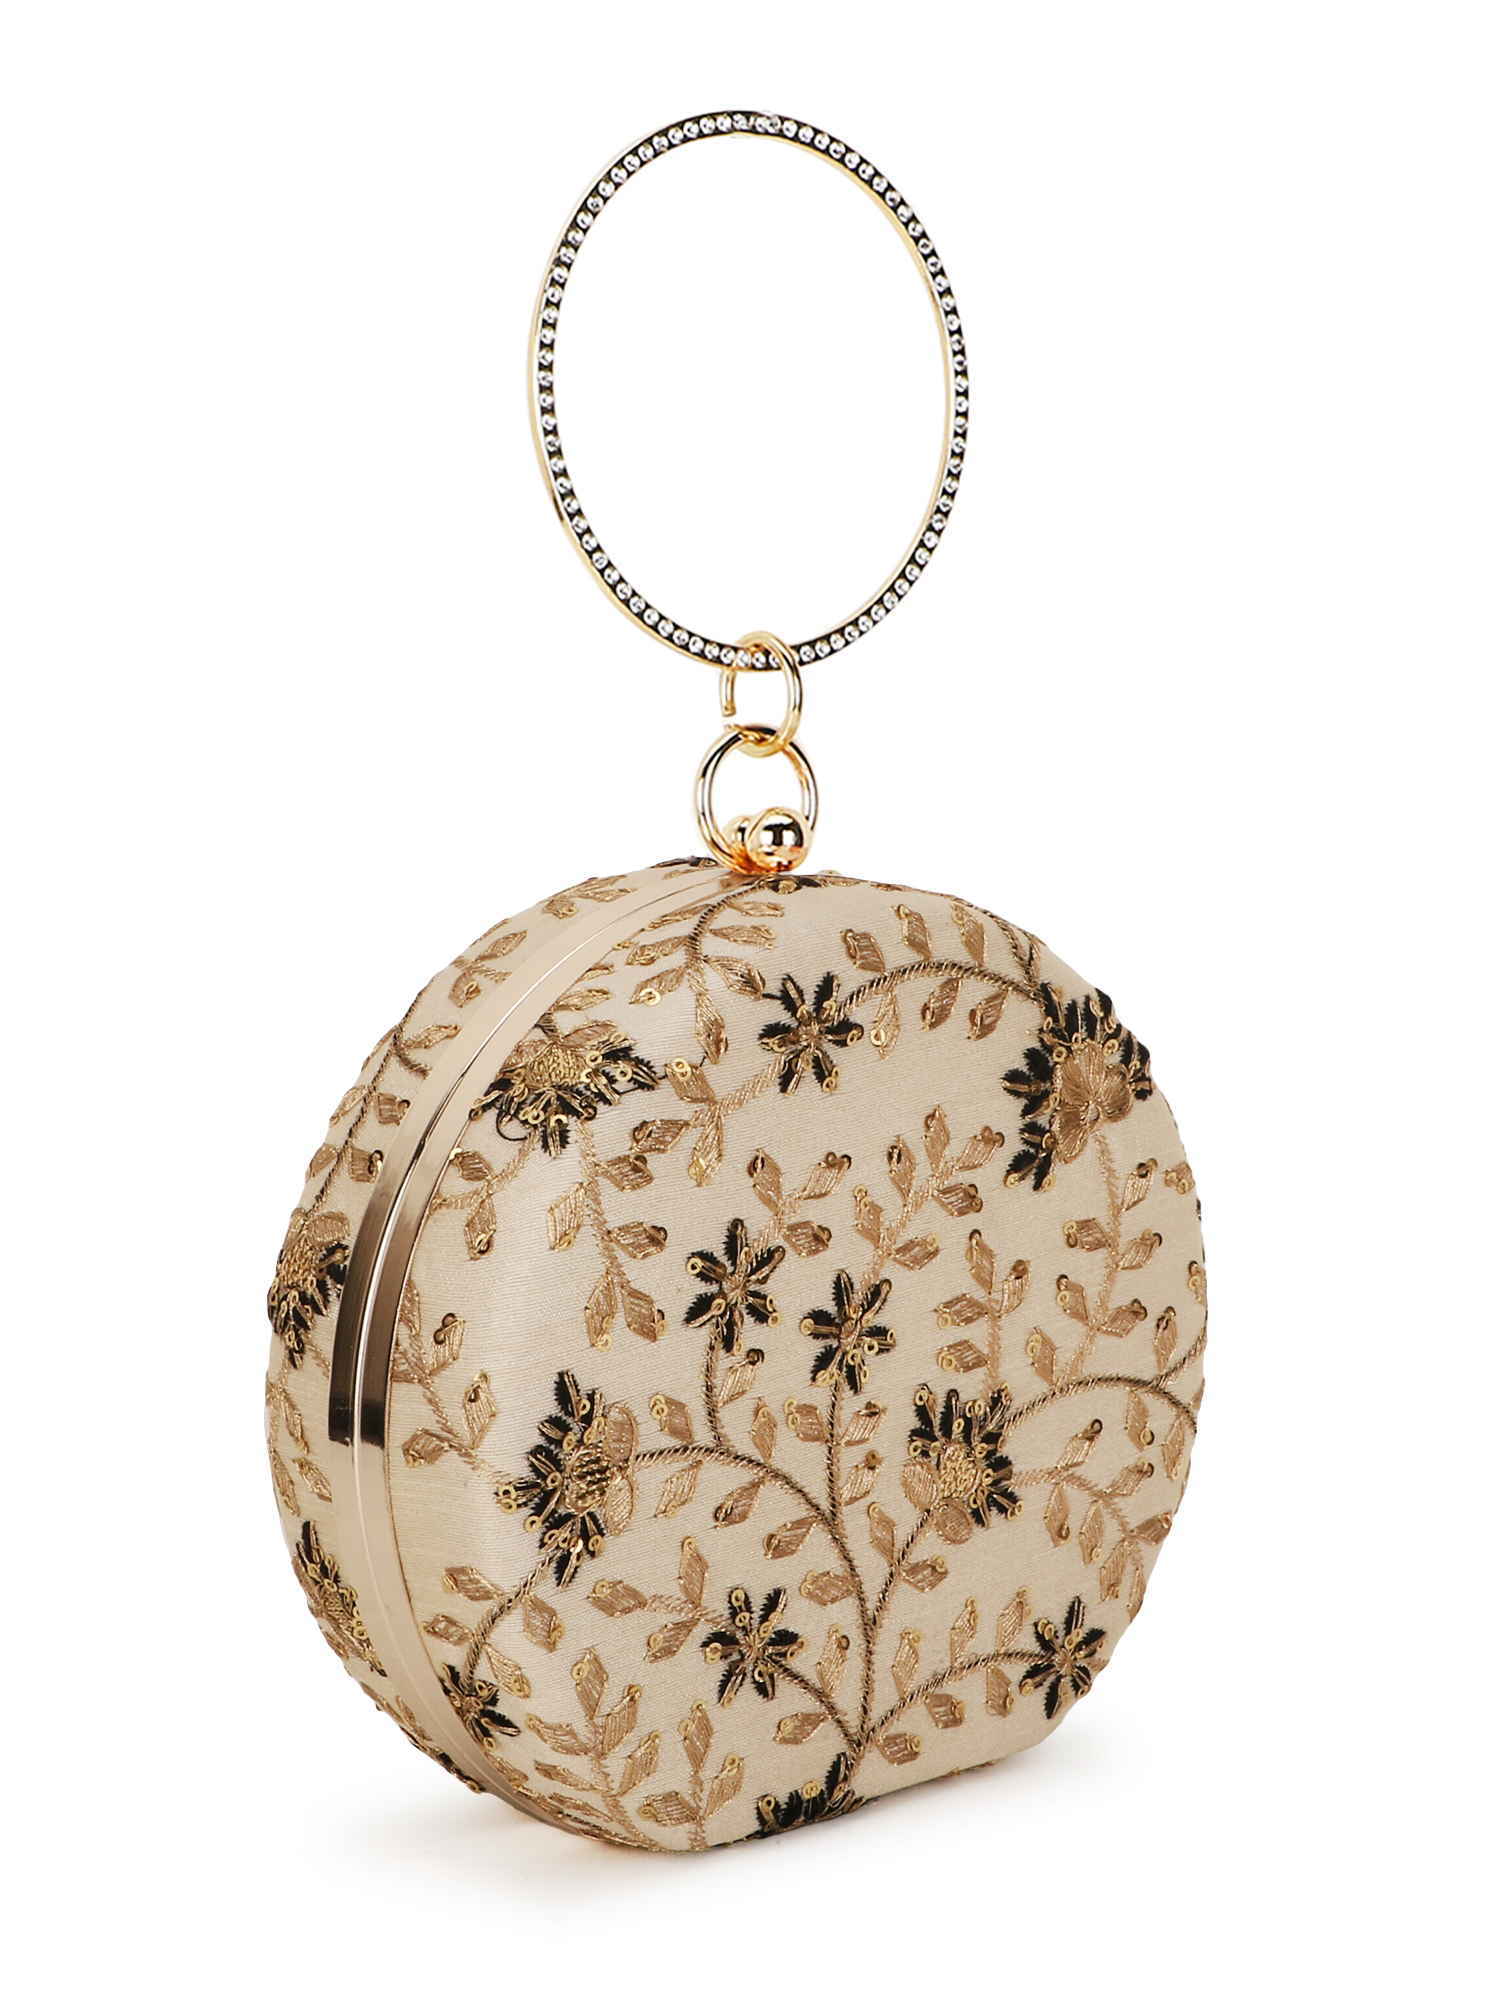 Gala Floral Embroidered Faux Silk Clutch